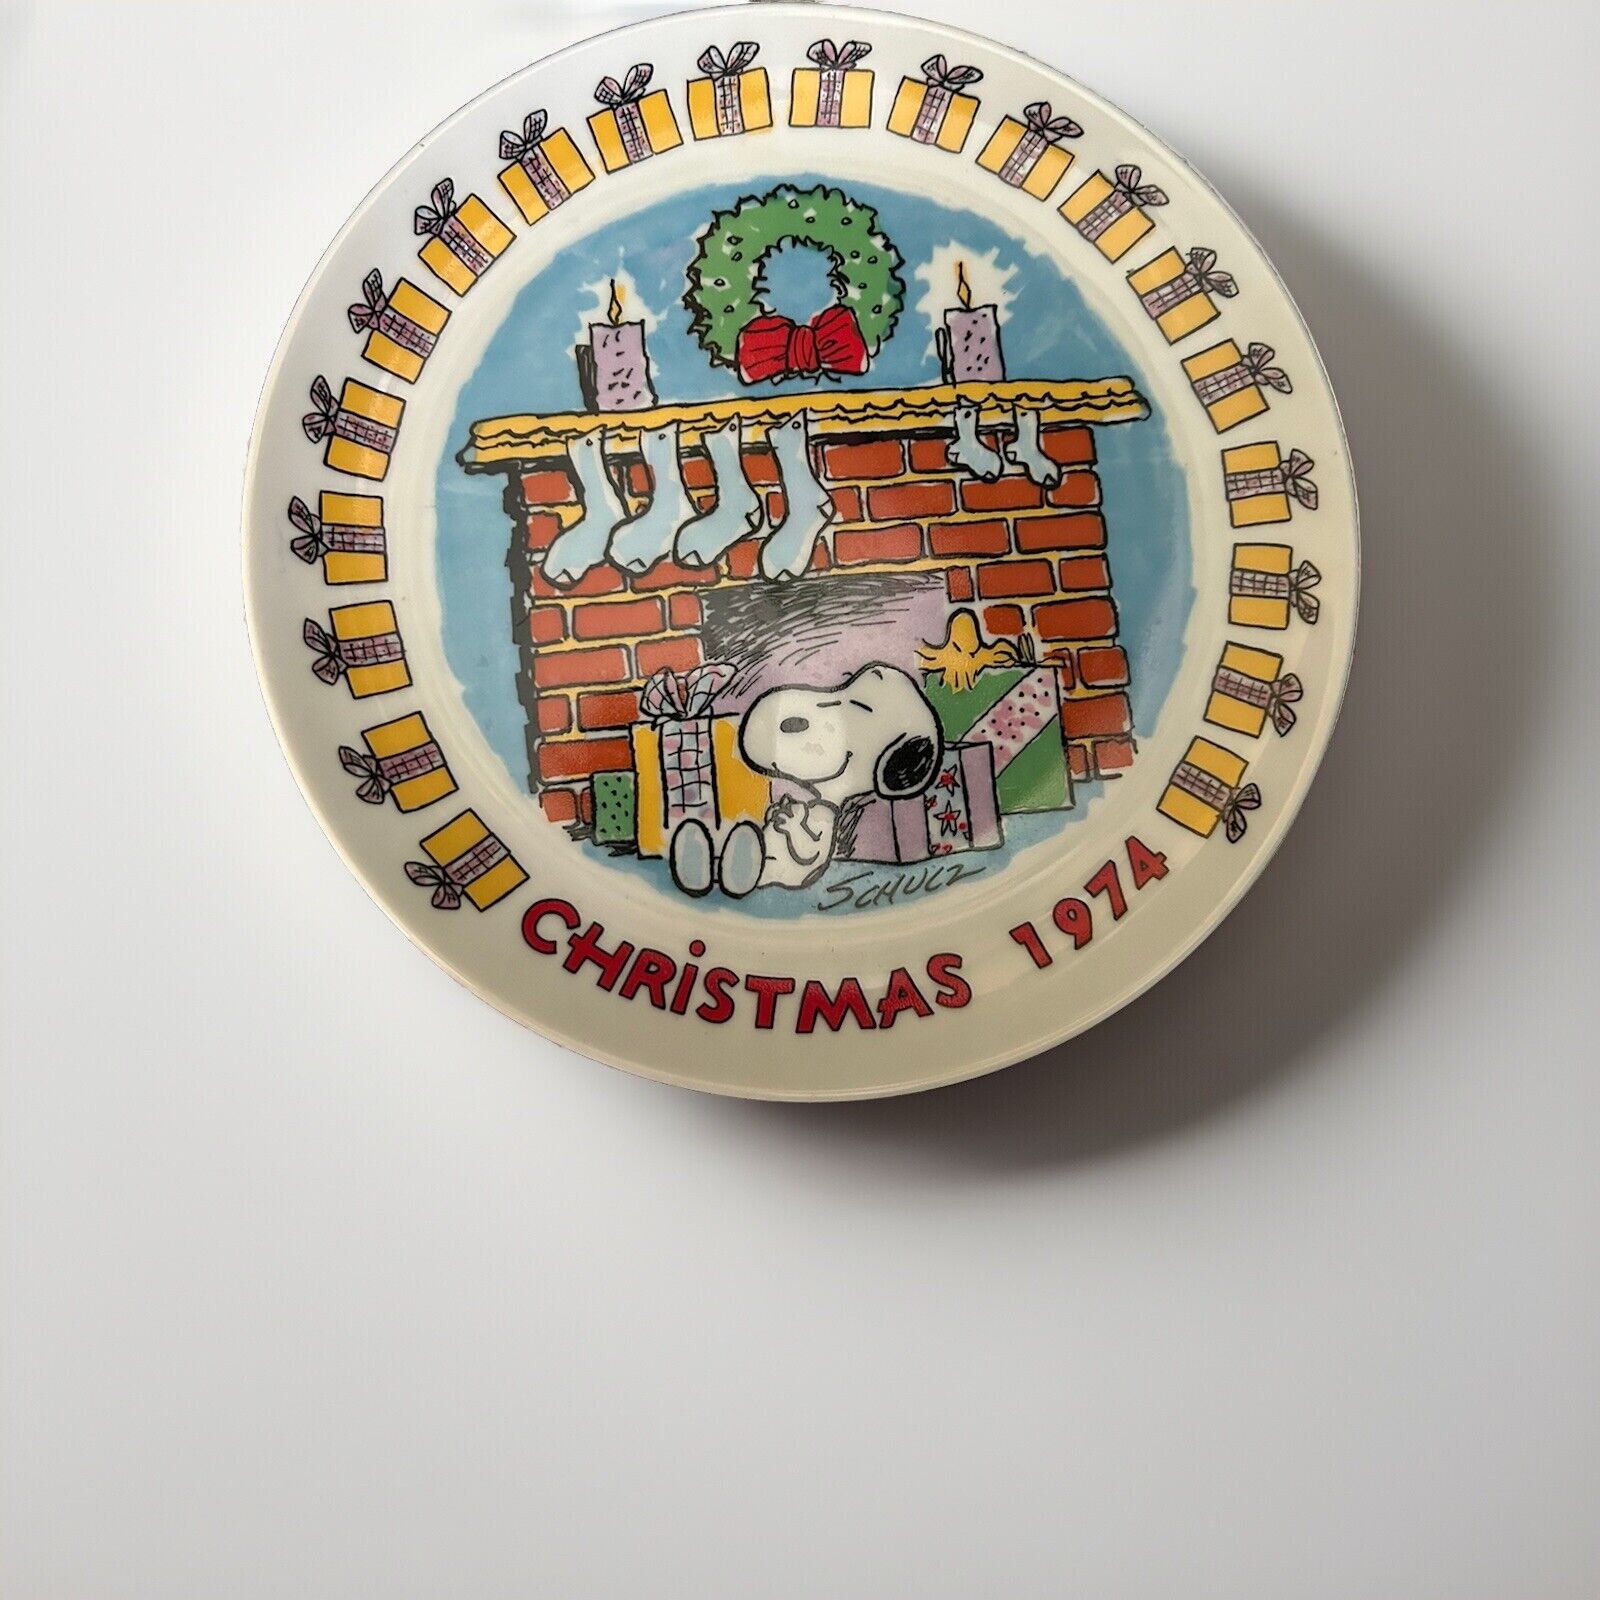 PEANUTS Snoopy 1974 Christmas Collectors Plate Schmid Brothers Limited Edition